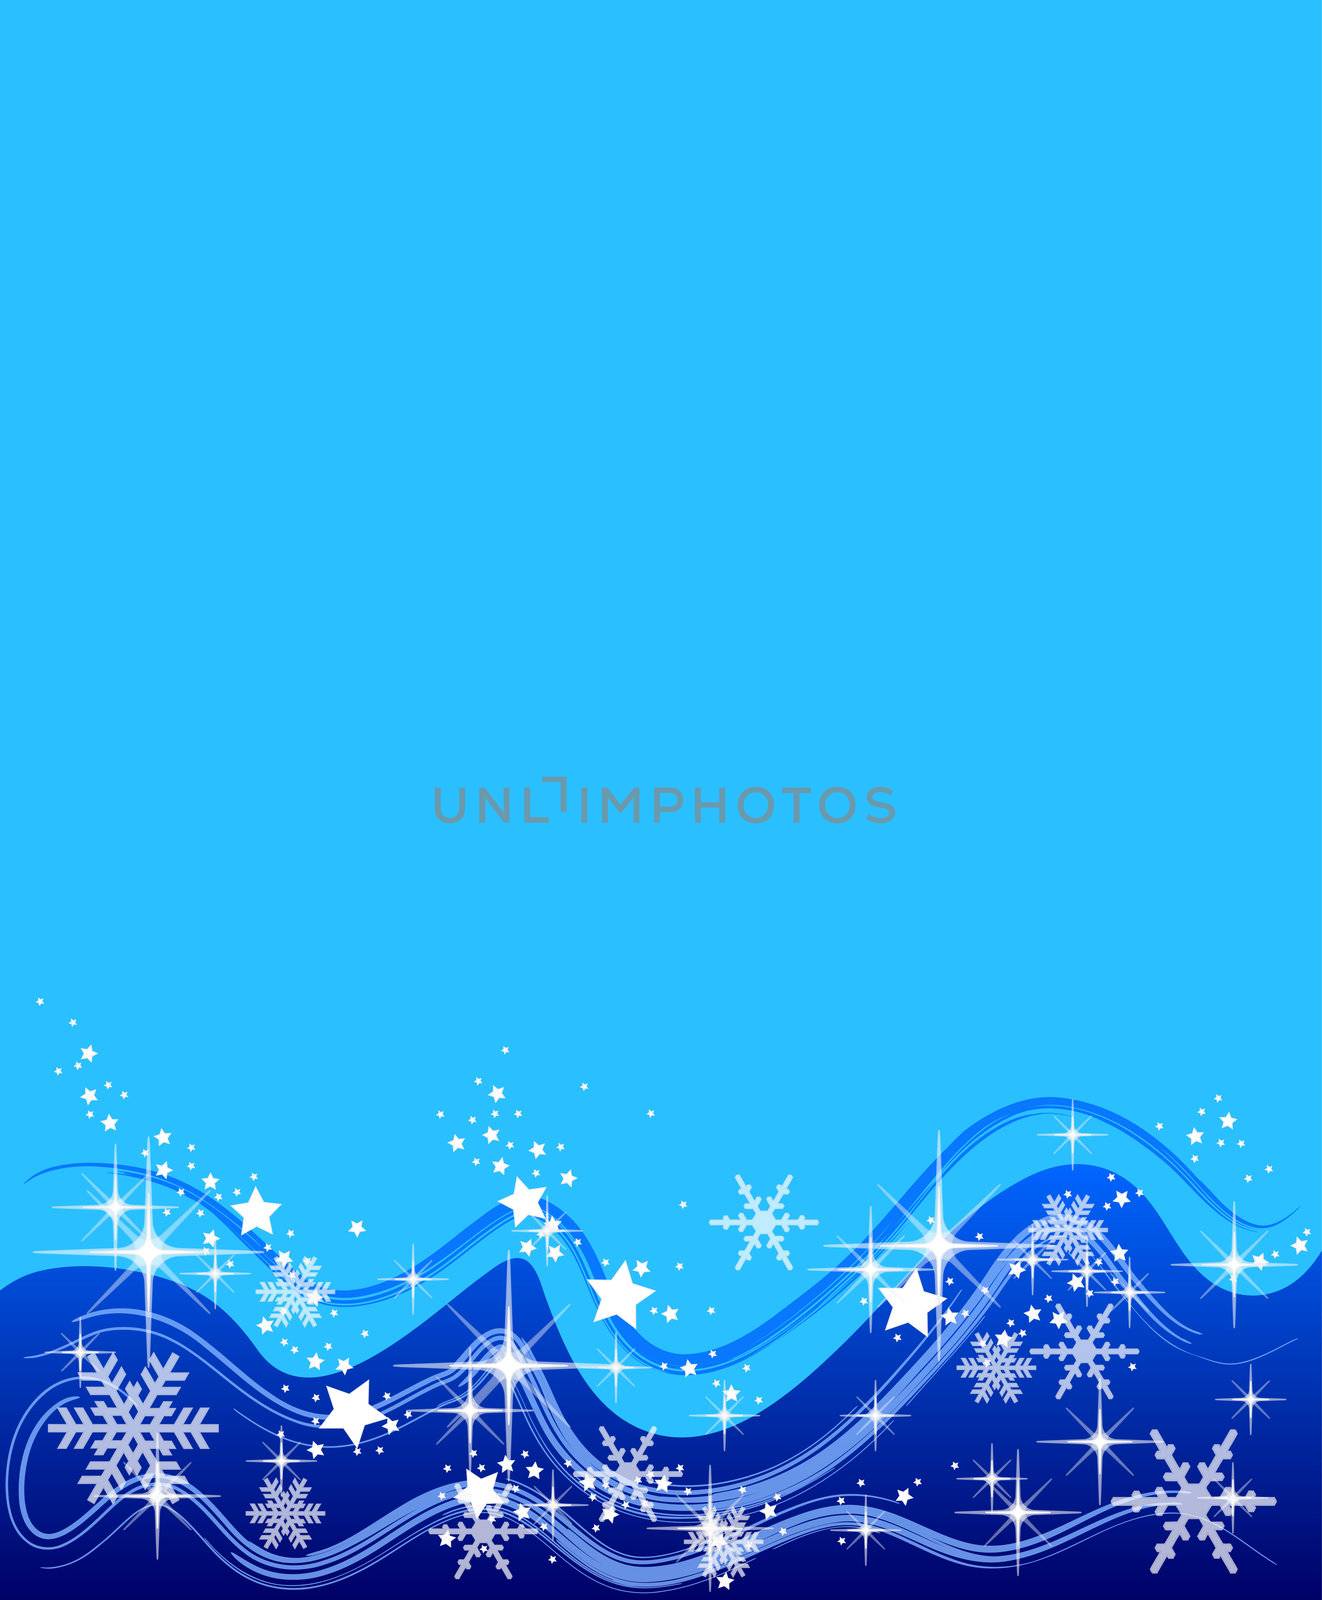 Illustration of a blue background with stars and snowflakes by peromarketing